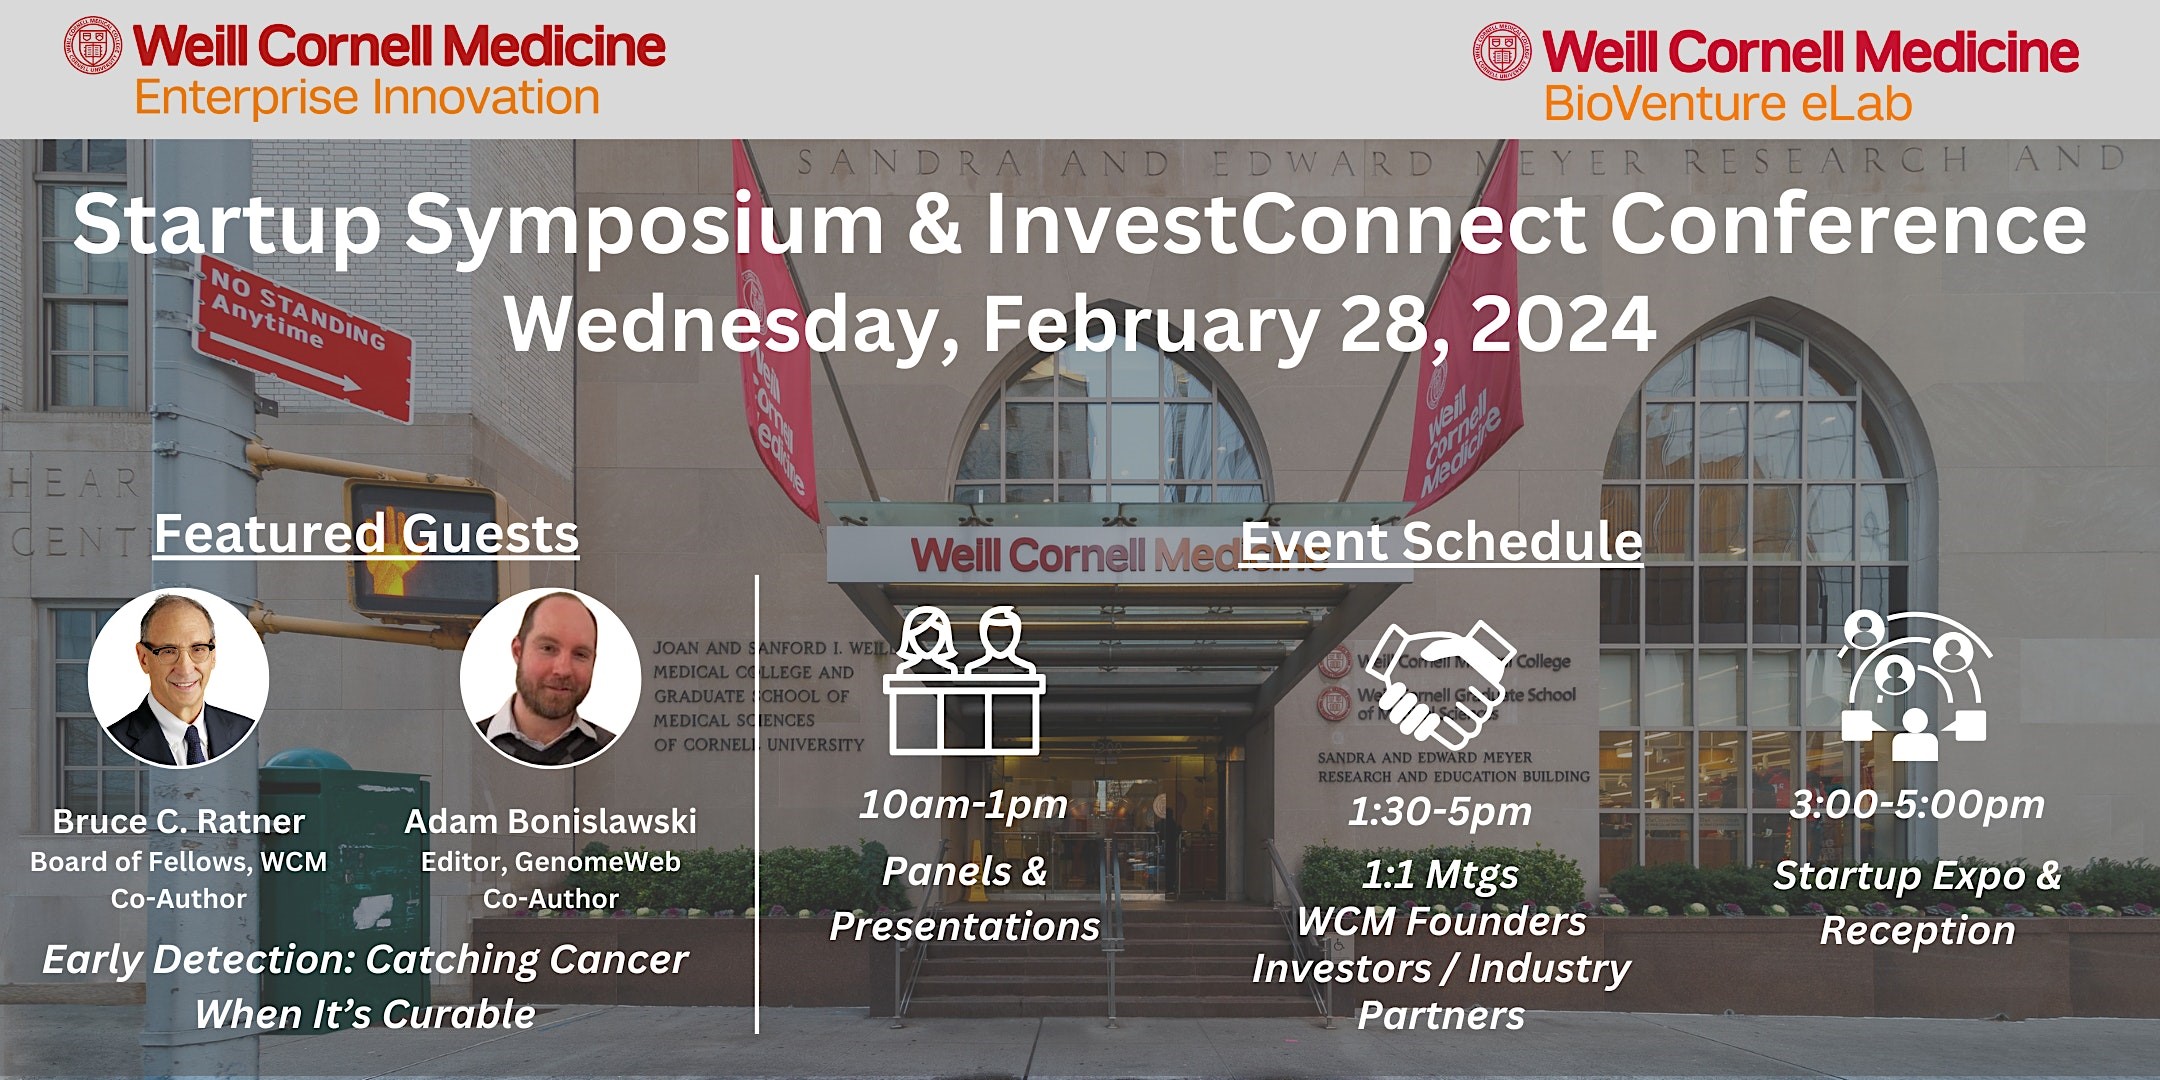 Event details and speaker headshots against a background of Weill Cornell campus